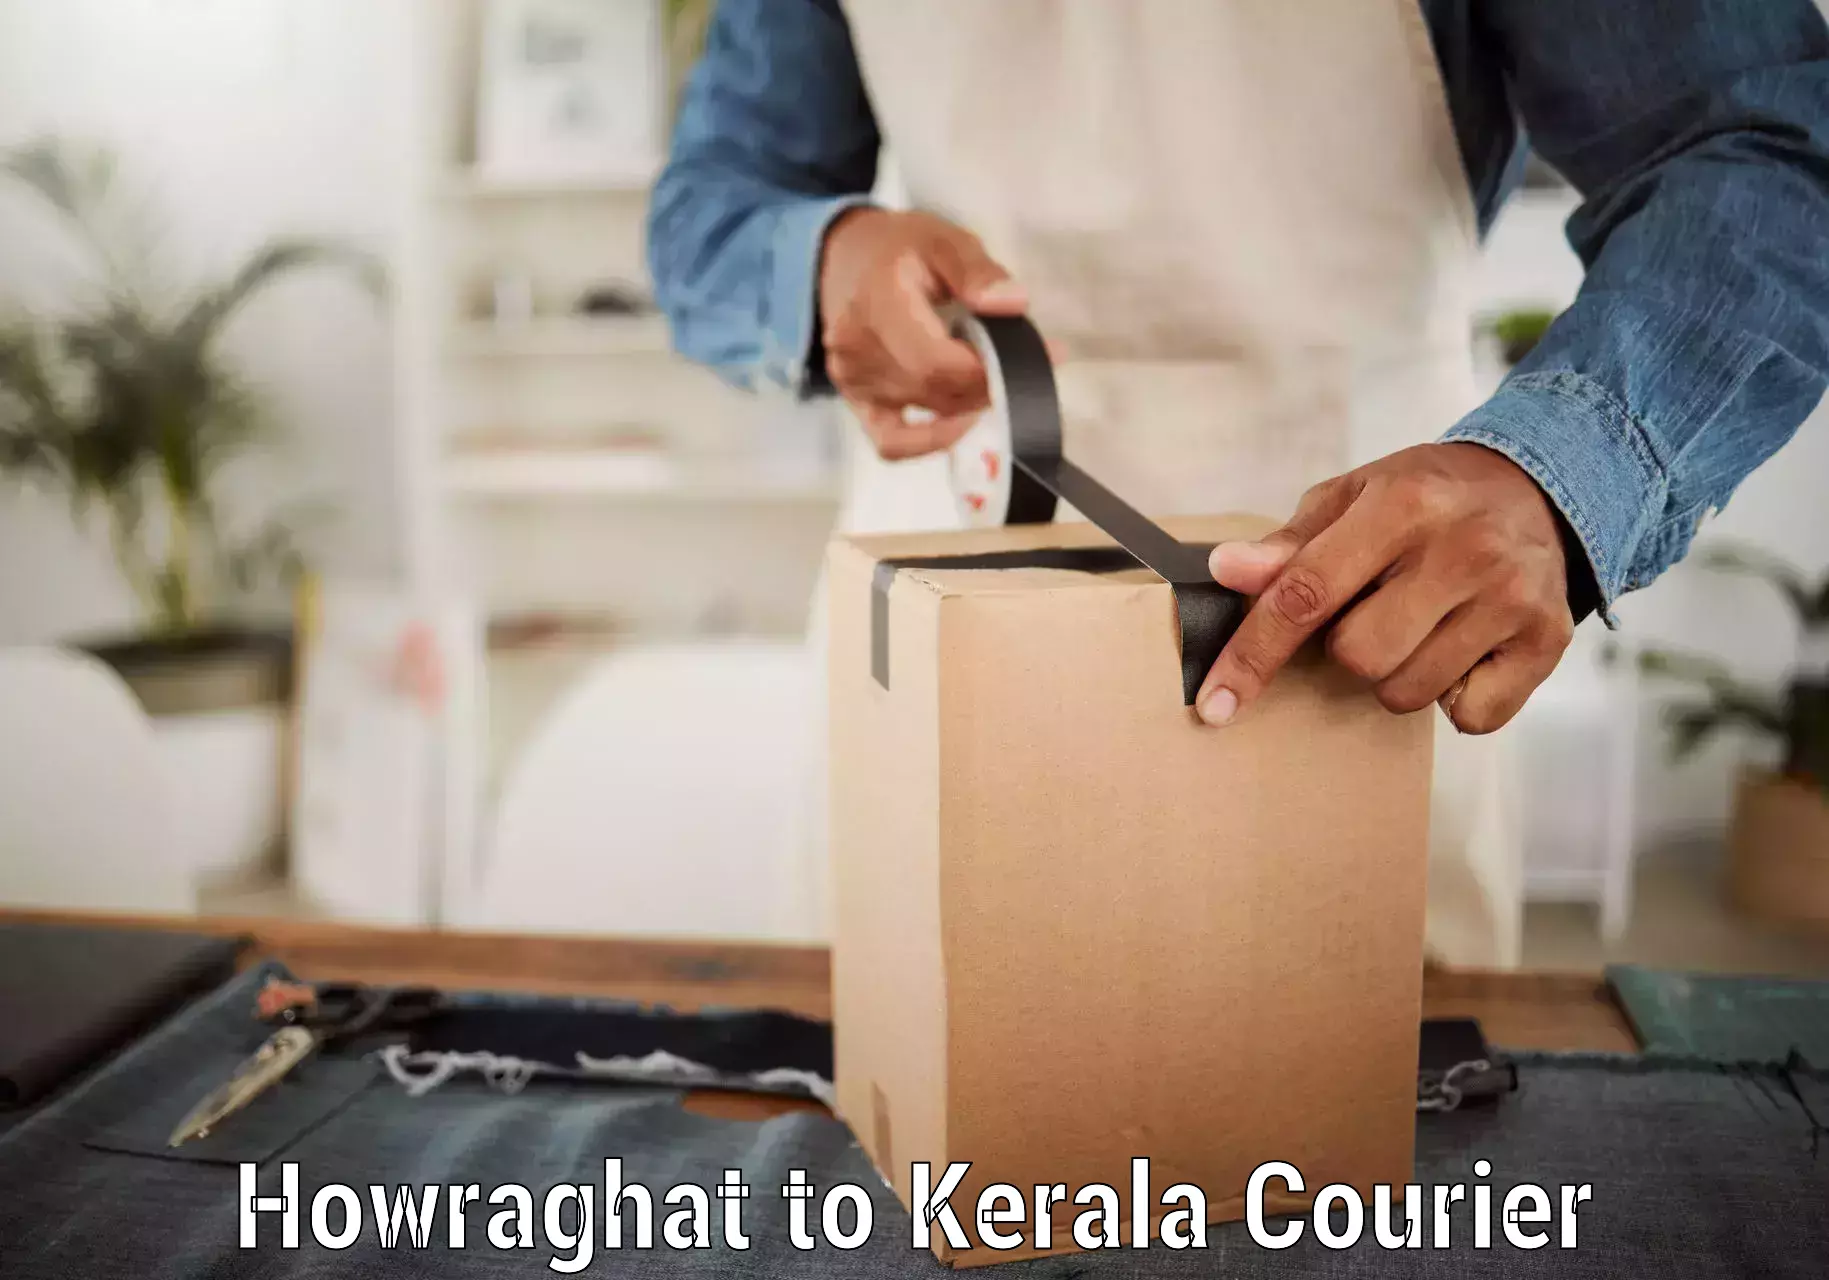 Special handling courier Howraghat to Cochin Port Kochi